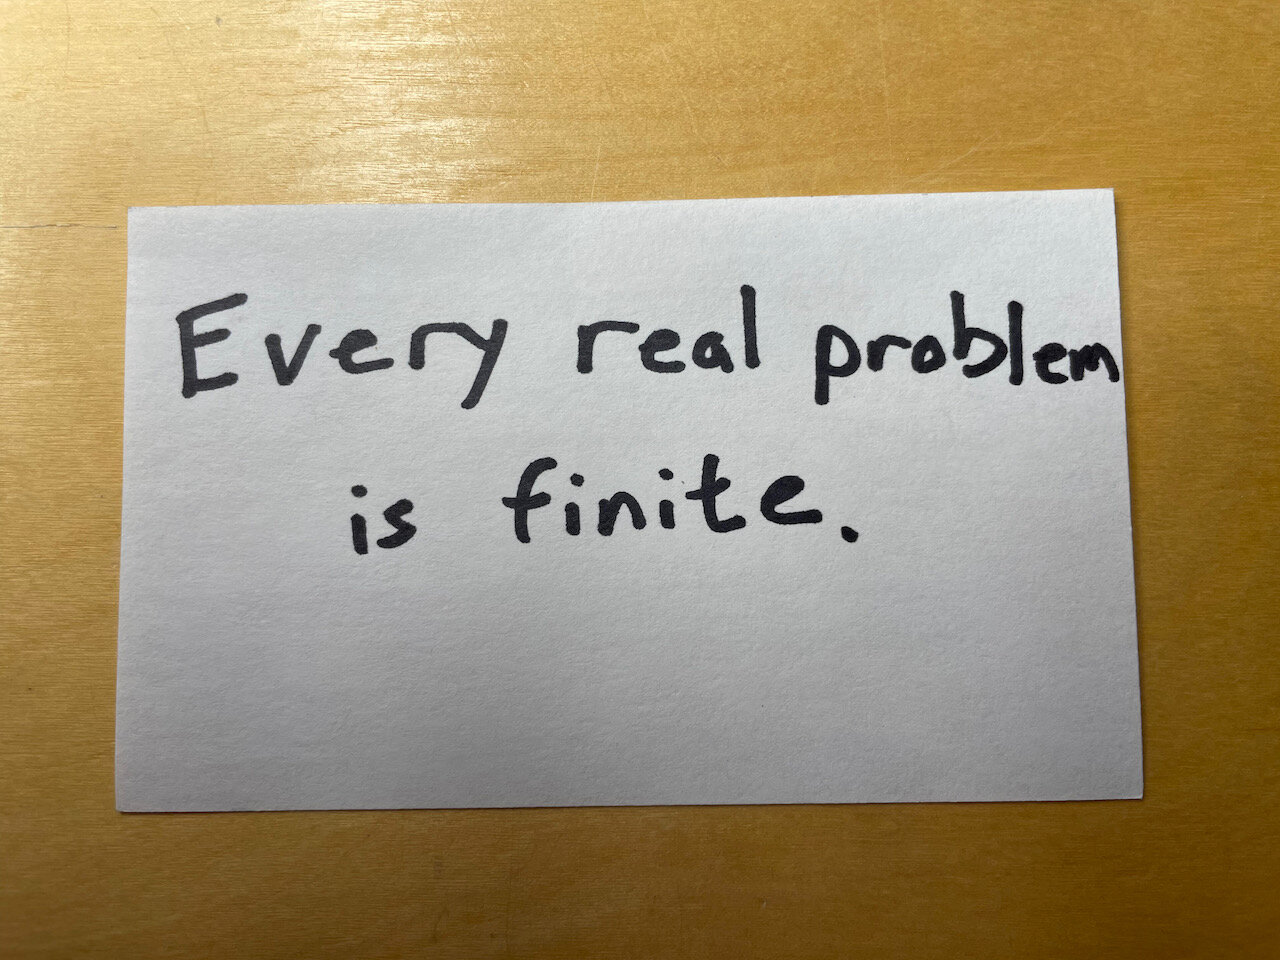 Every real problem is finite.